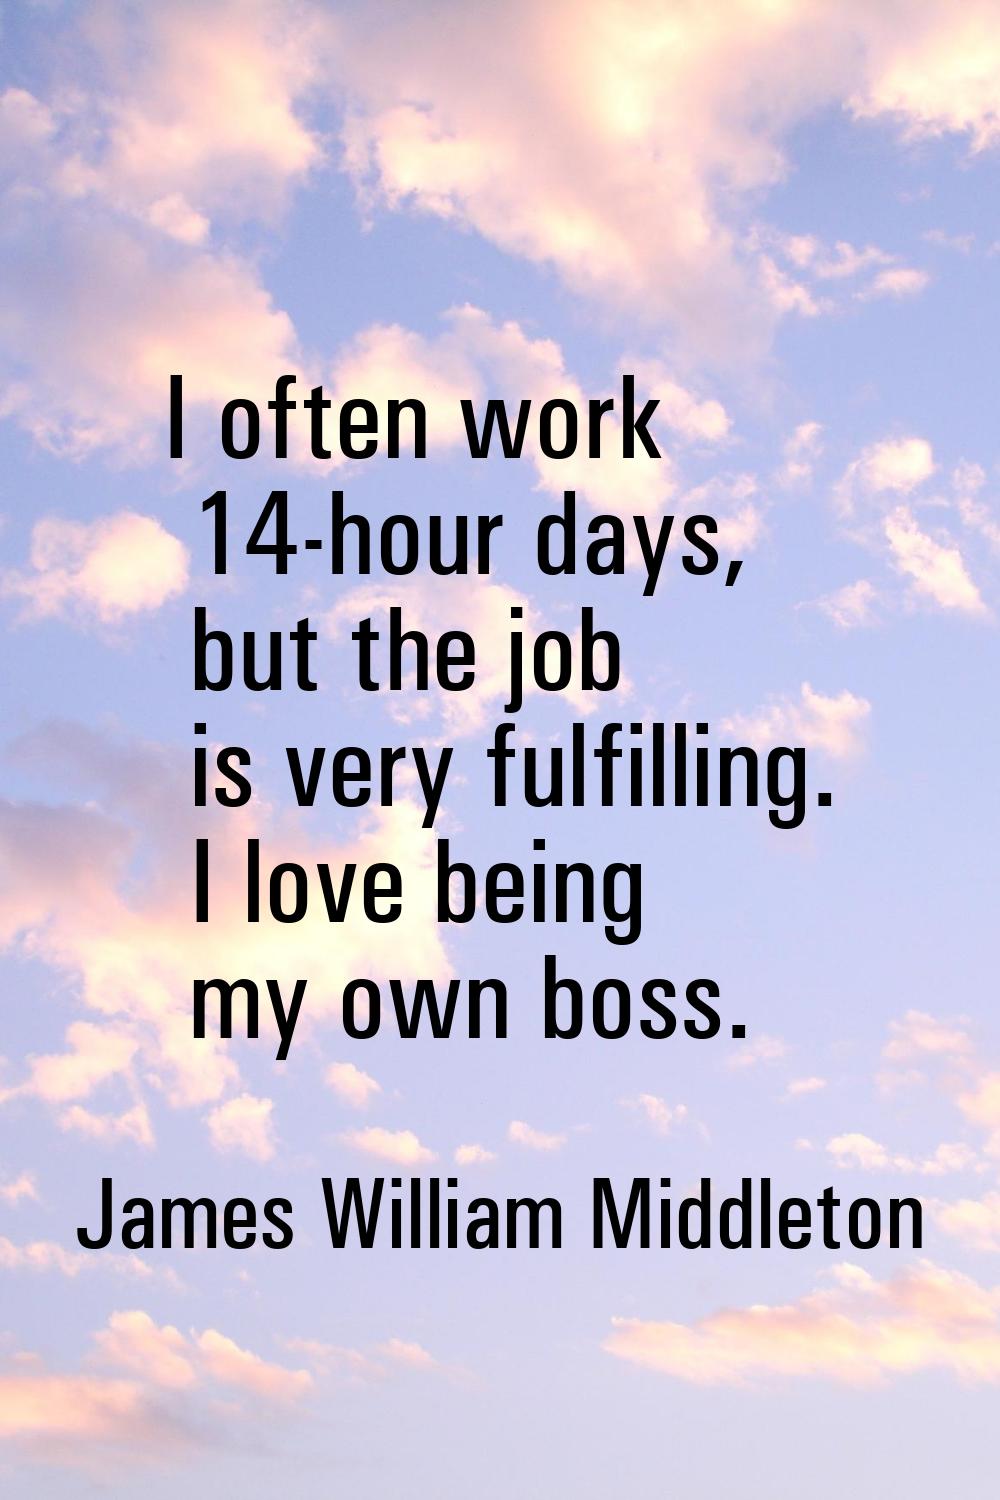 I often work 14-hour days, but the job is very fulfilling. I love being my own boss.